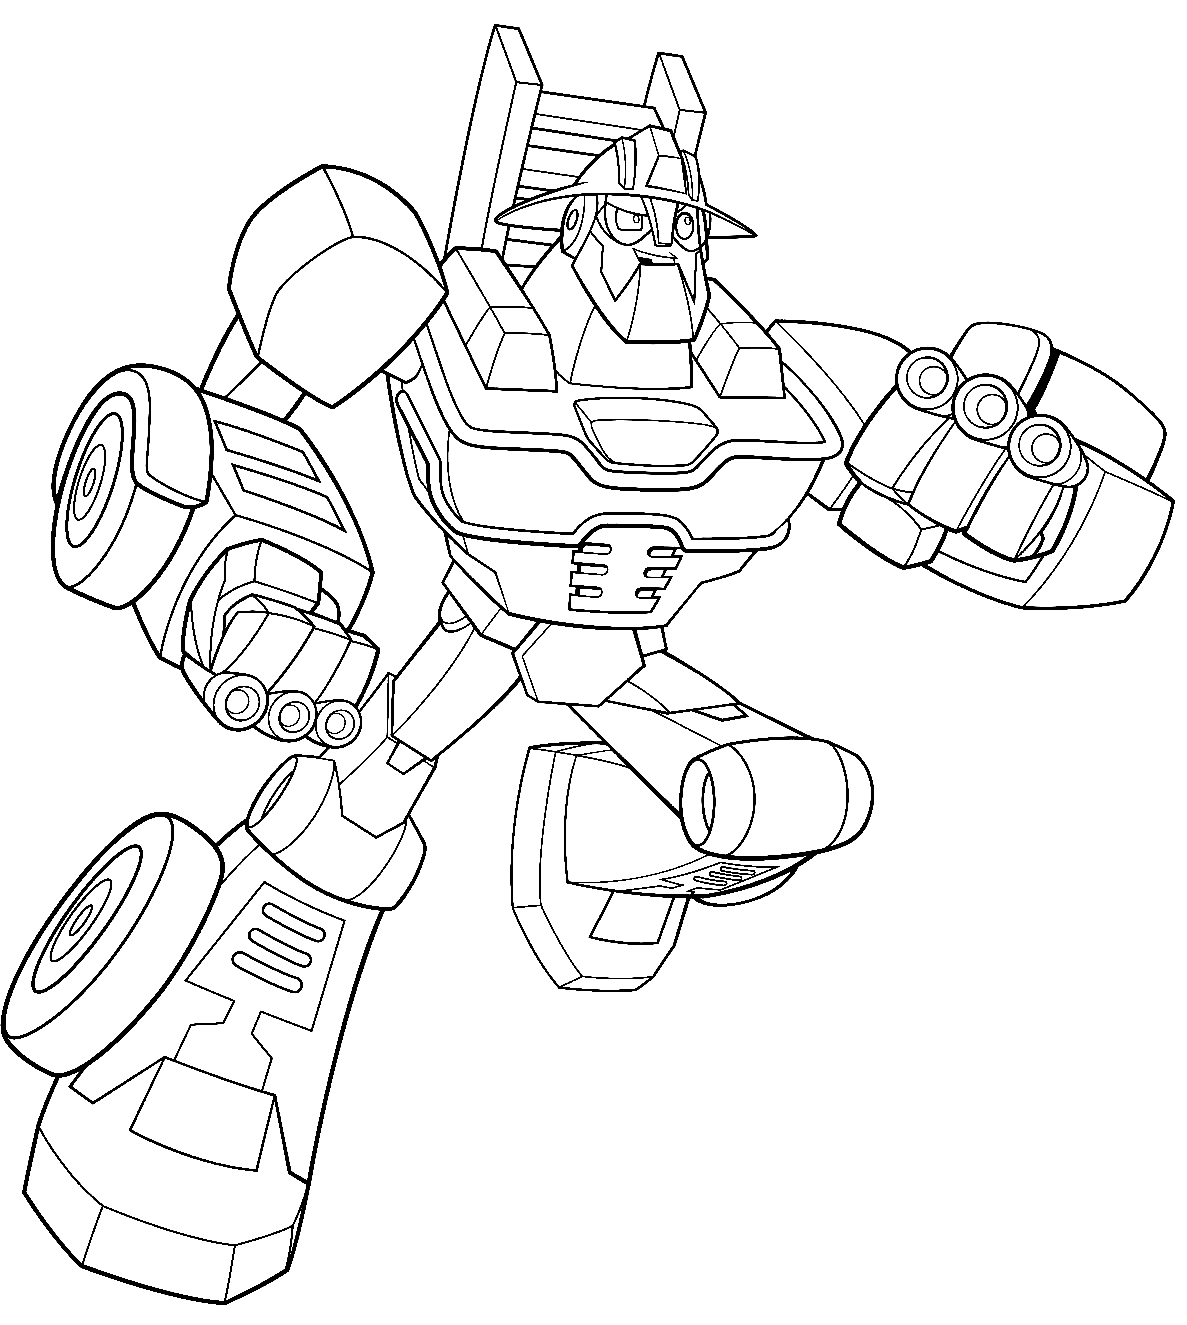 Hoist from Transformers Rescue Bots Academy Coloring Pages - Rescue Bots Coloring  Pages - Coloring Pages For Kids And Adults